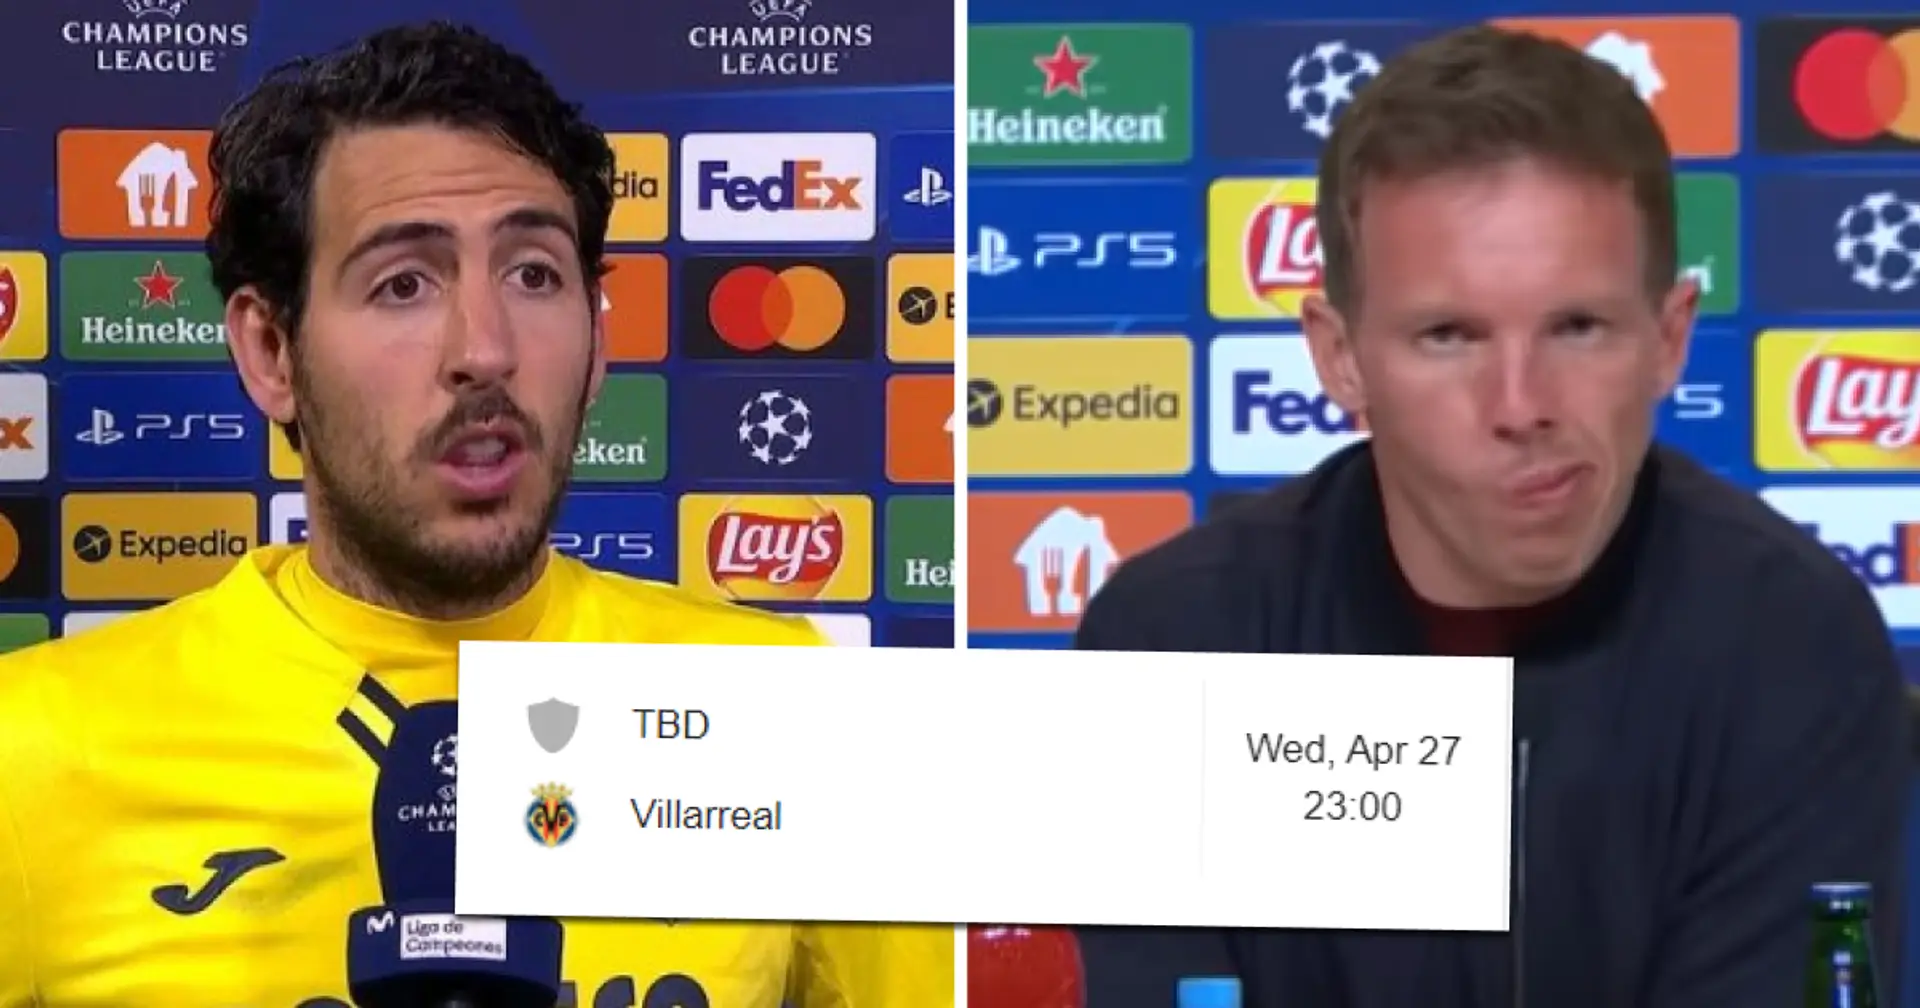 Villarreal's Parejo: 'Nagelsmann said he wanted to settle the tie in first leg. Sometimes when you spit up, it falls on your face'